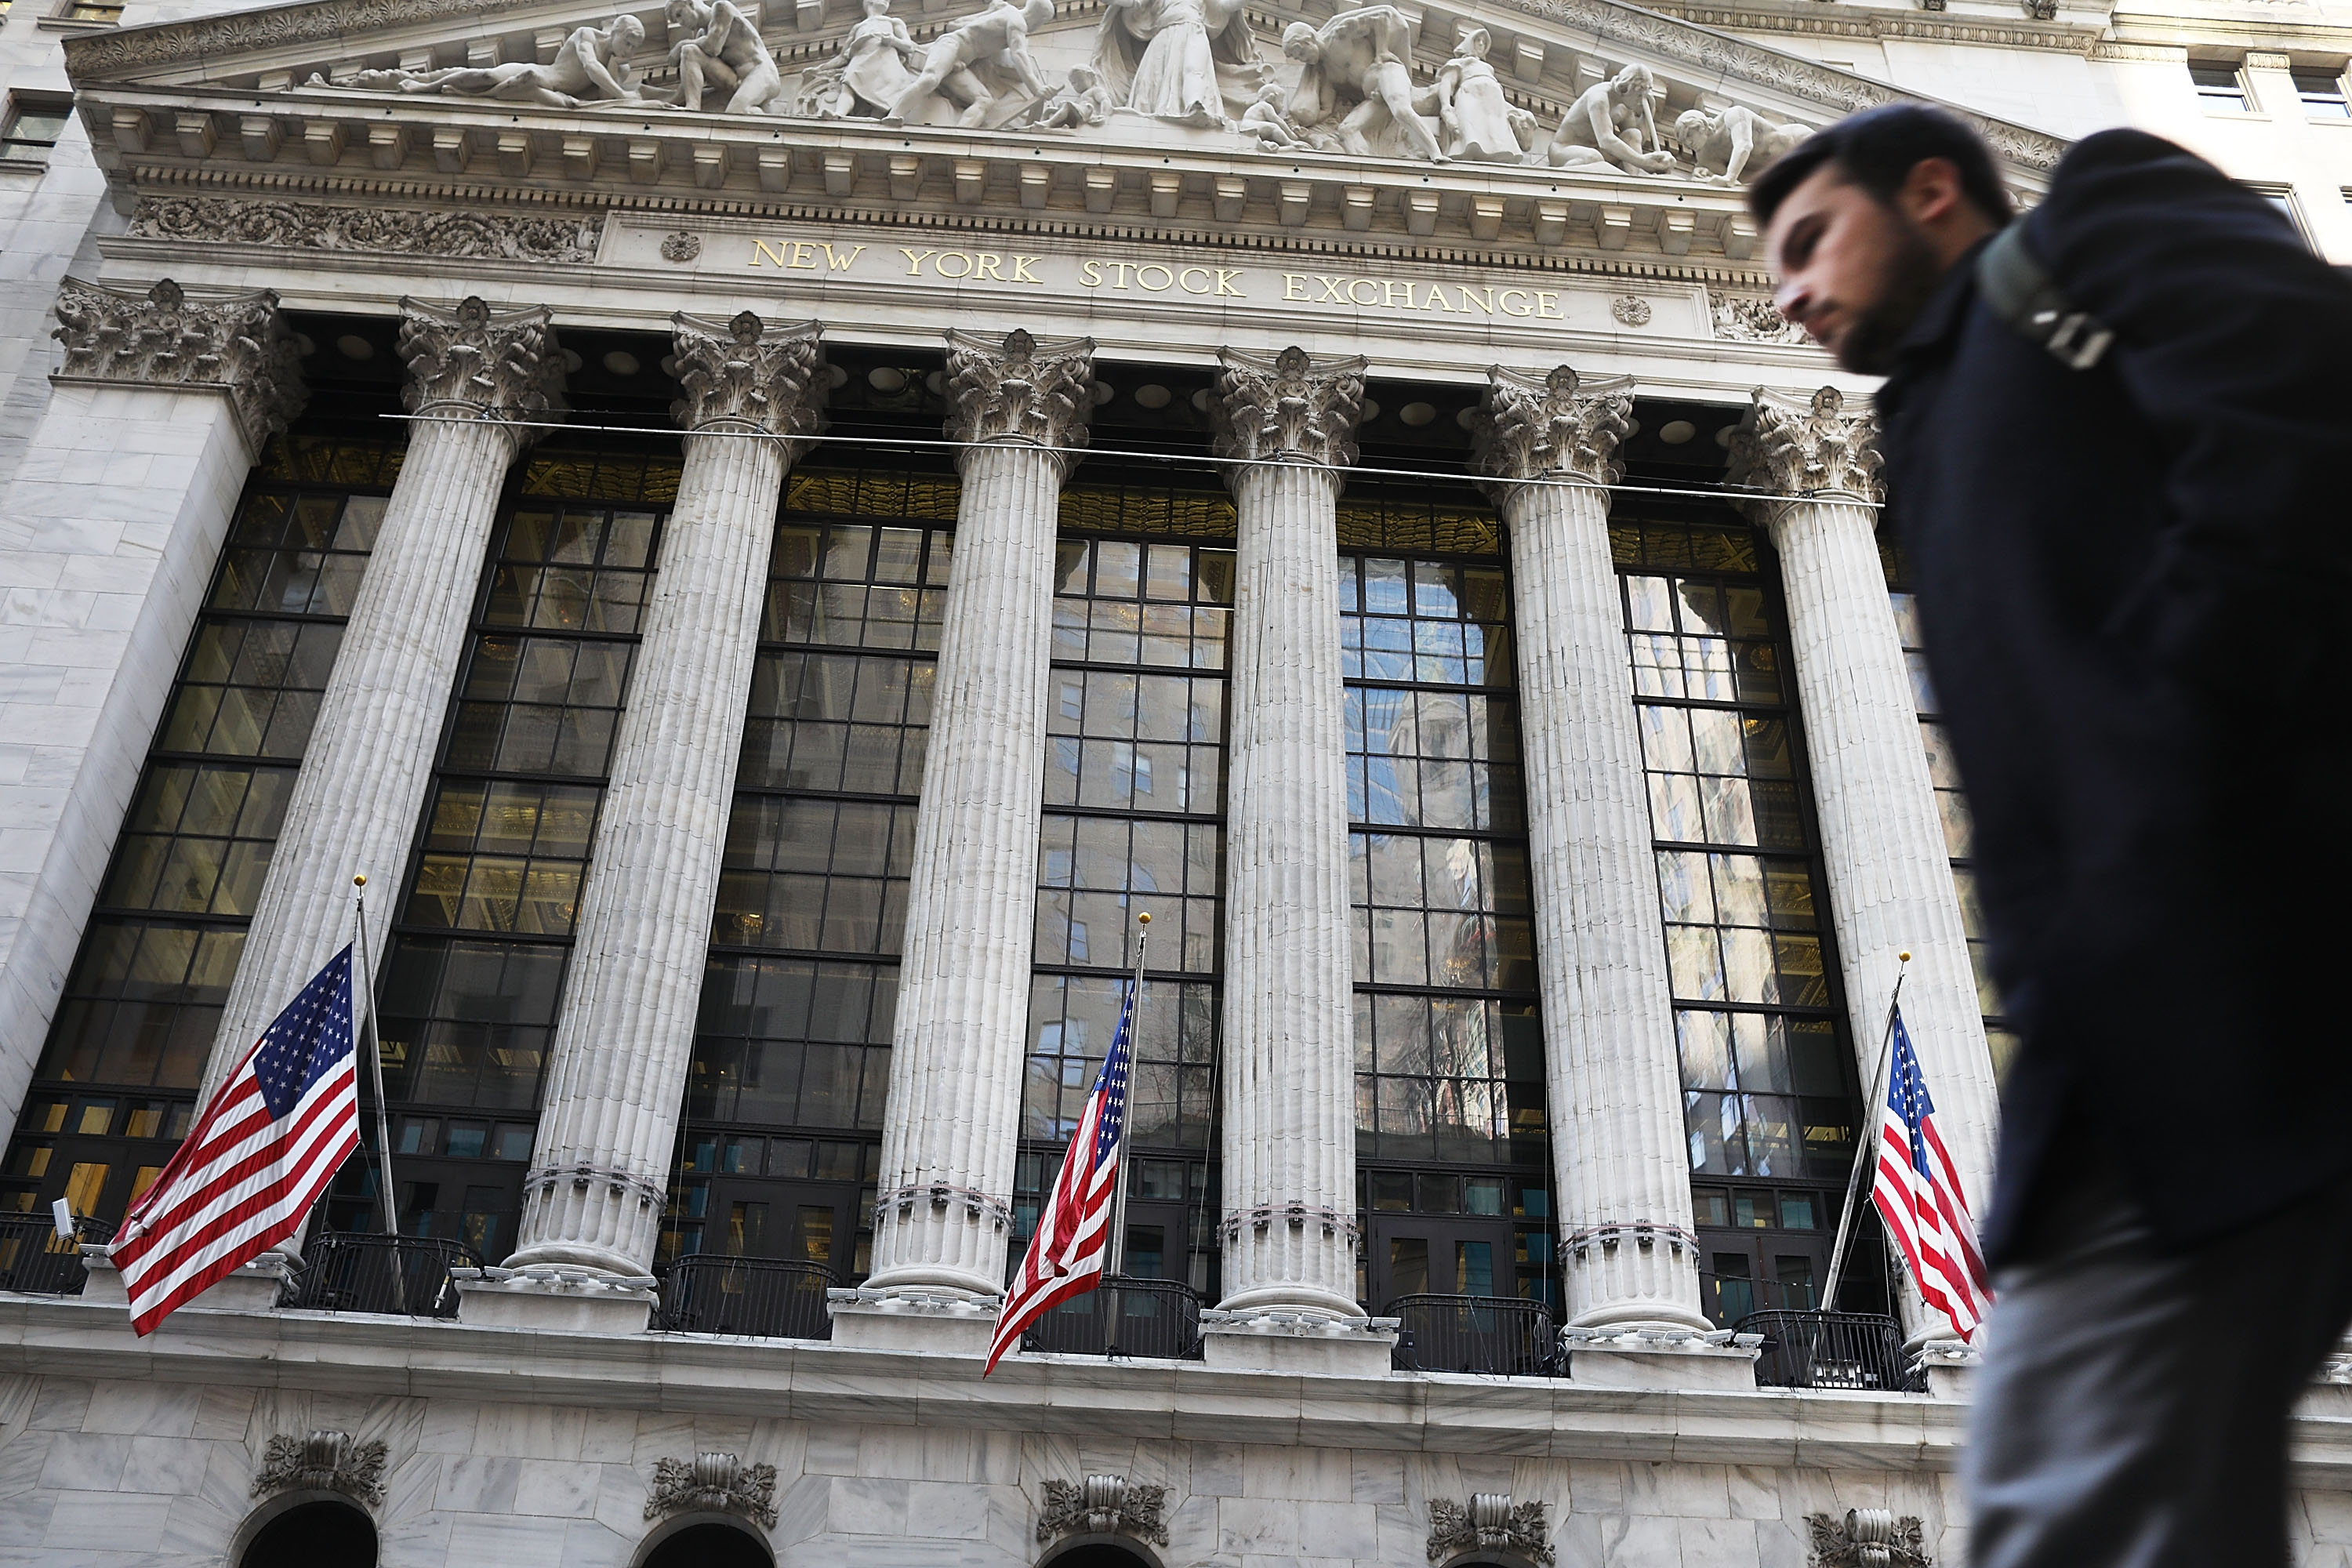 People walk by the New York Stock Exchange (NYSE) on Feb. 6, 2017 in New York City. (Spencer Platt&mdash;Getty Images)